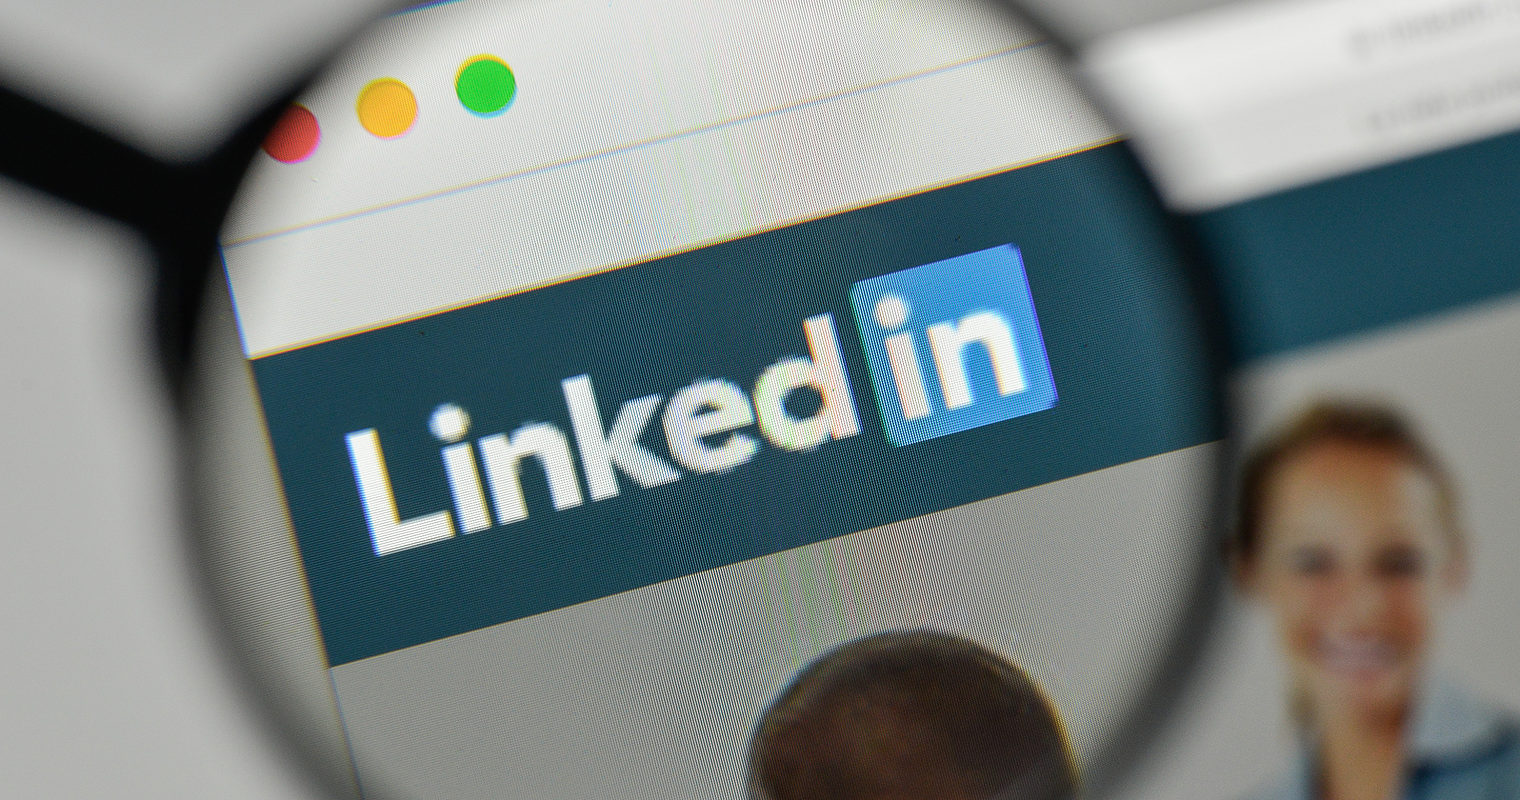 Marketers are Shifting Advertising Budgets to LinkedIn